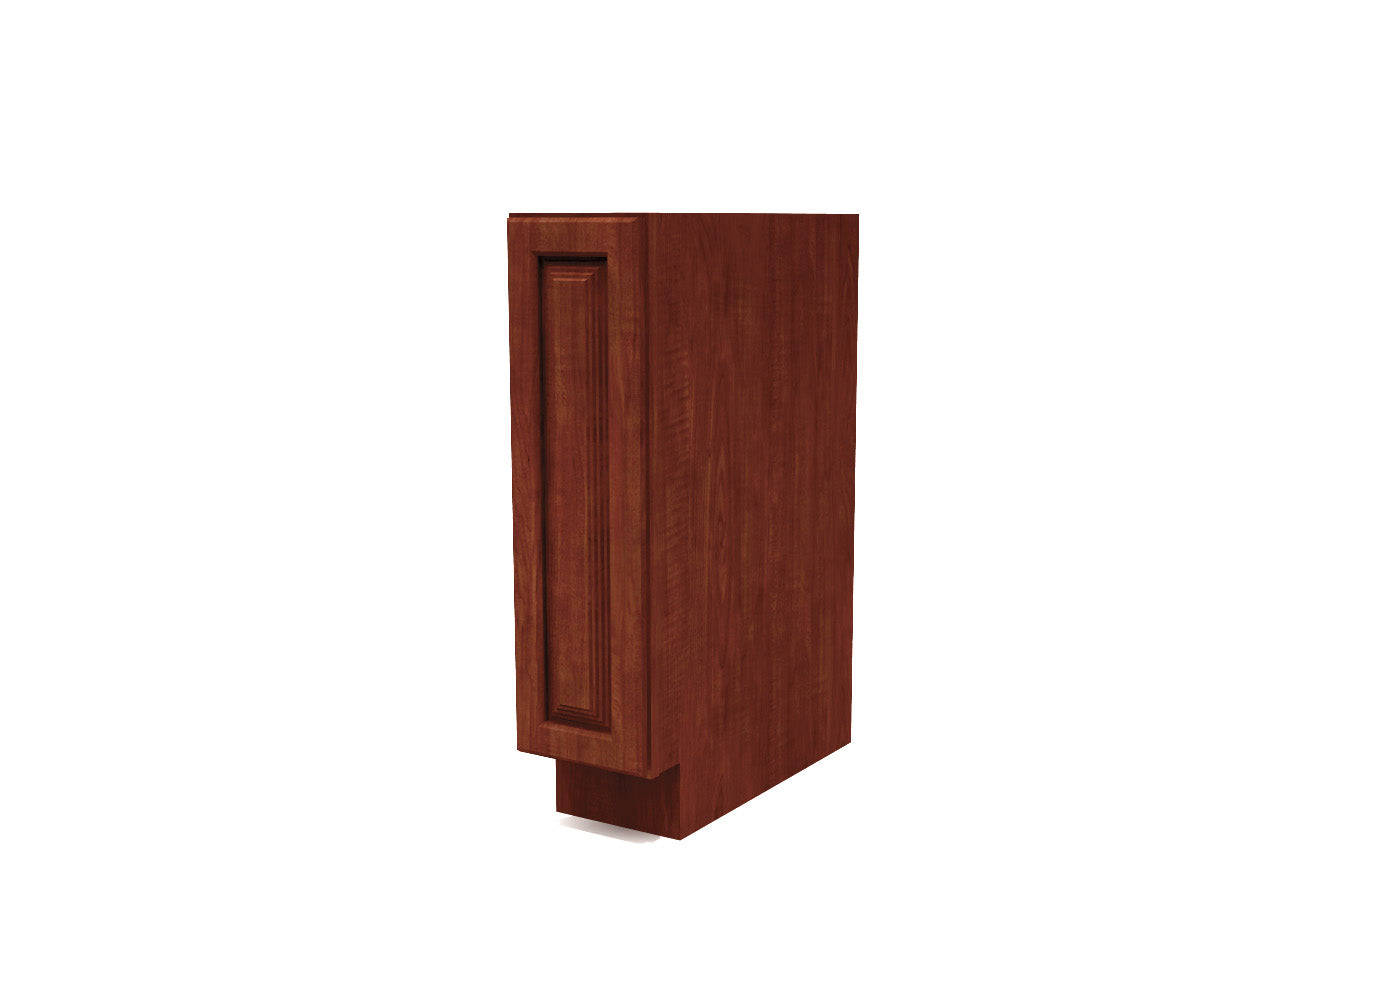 Spice Base Full Height Door 9" Wide Cherry Raised Panel Cabinet